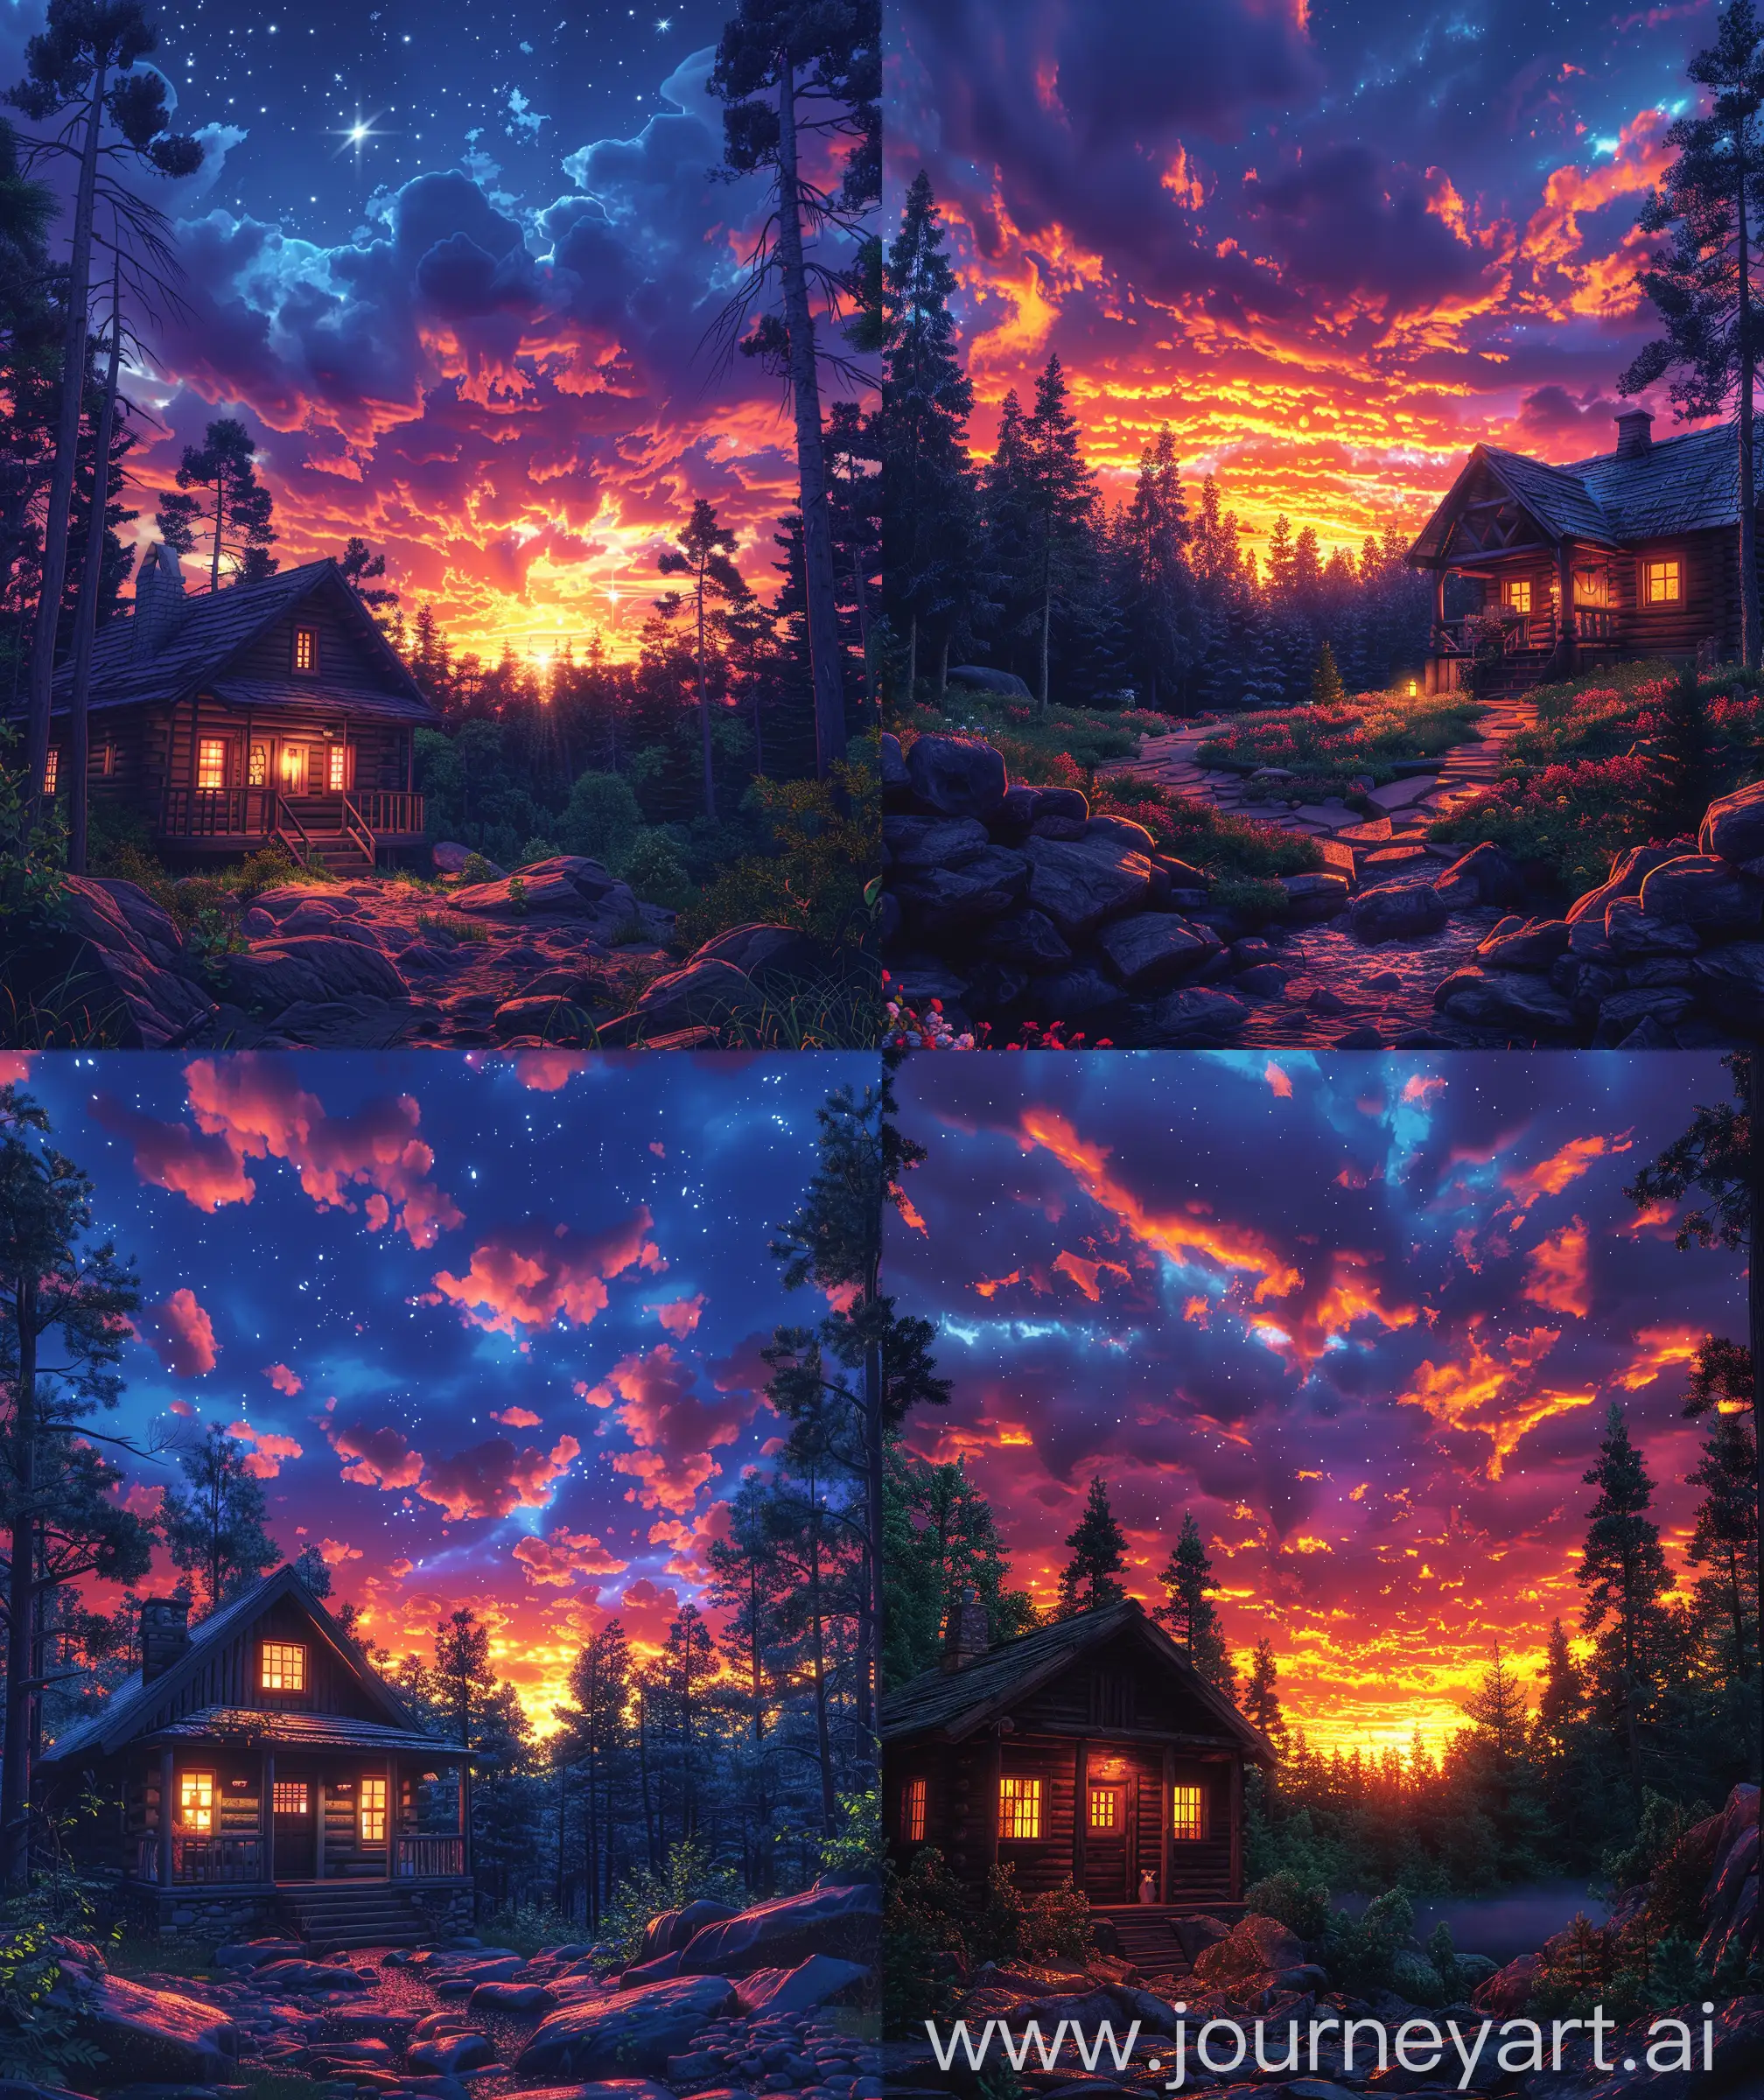 lofi anime art , vibrant sky, vibrant sunset sky , front facade view of cabin,forest, spring night, vibrant gradient,8k, highly detailed, illustration, ultra hd, High quality resolution, no blurry image, no hyperrealistic --ar 27:32 --s 600